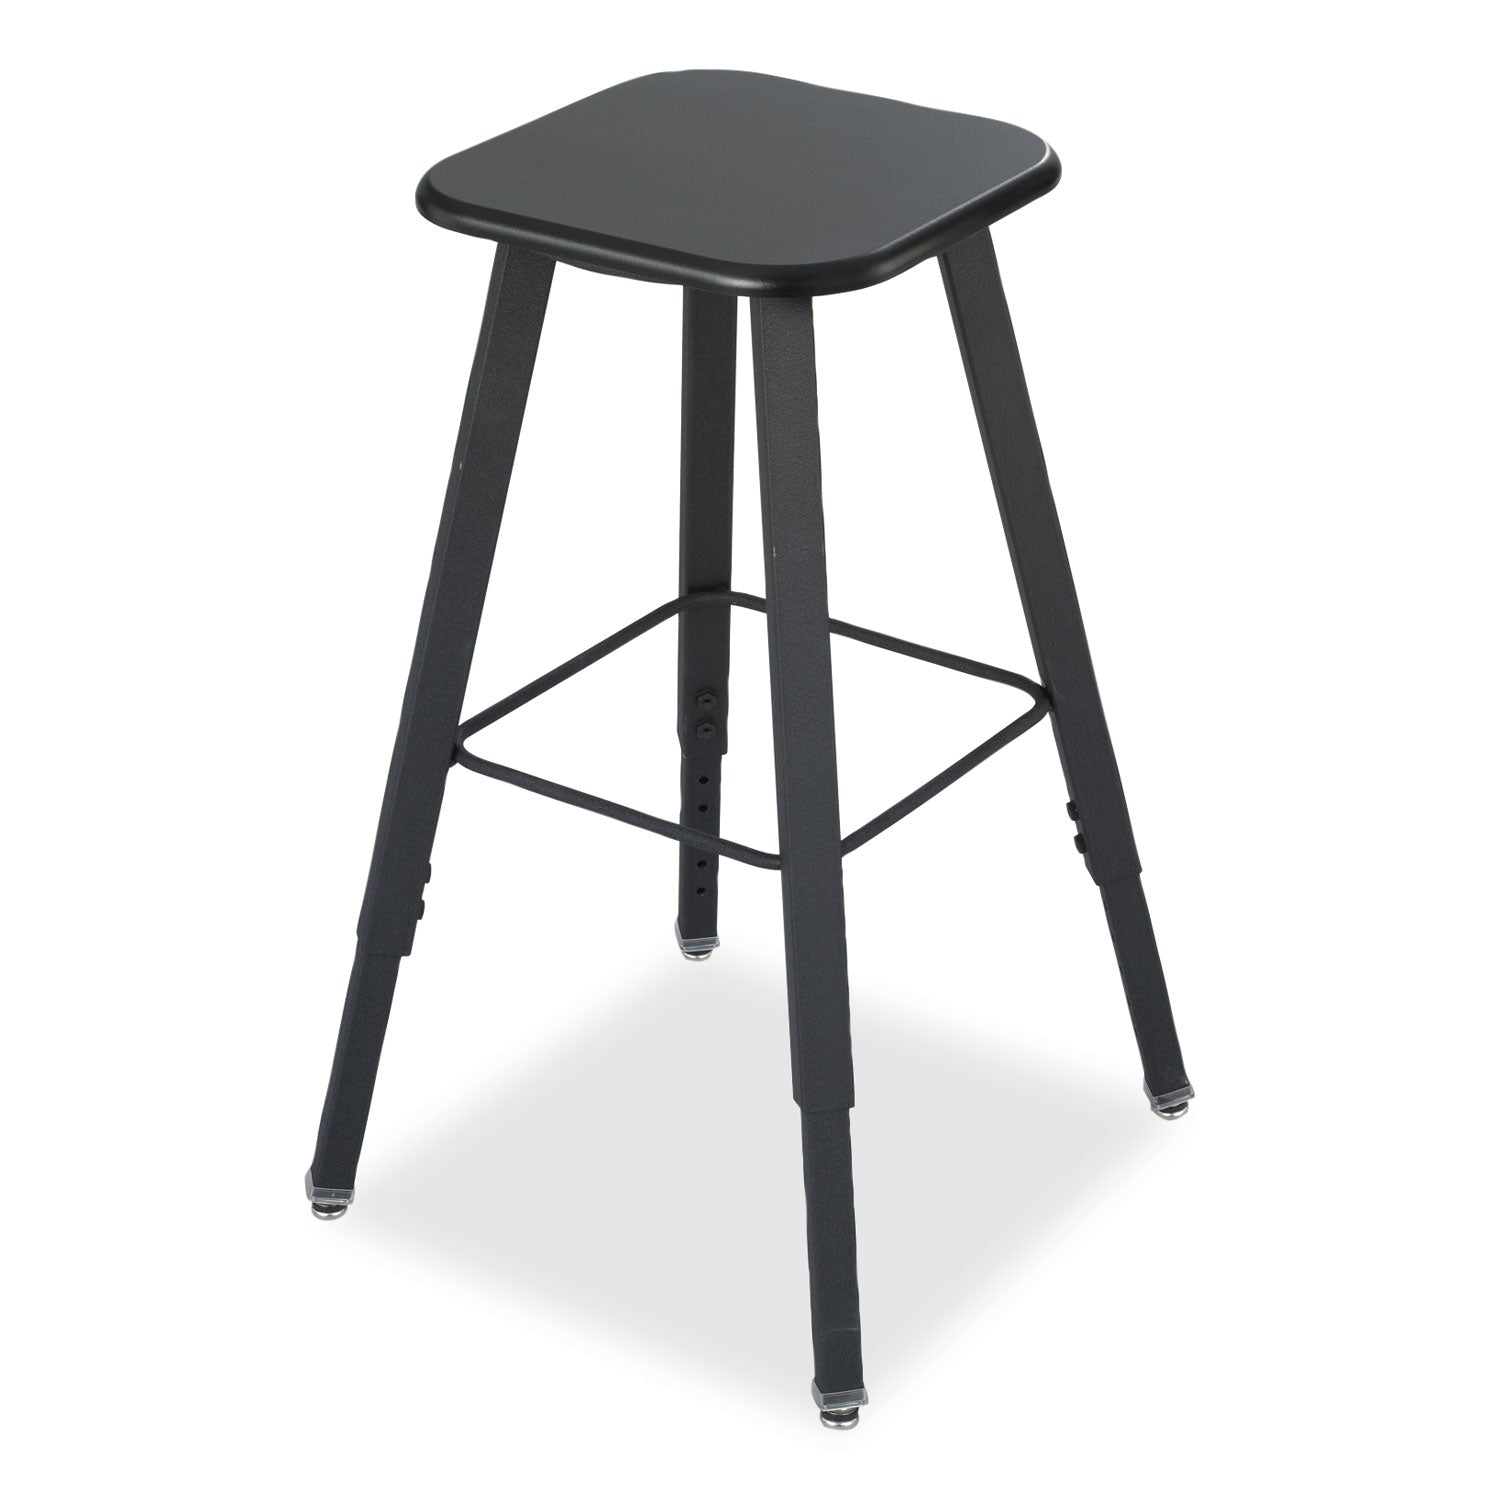 alphabetter-adjustable-height-student-stool-backless-supports-up-to-250-lb-355-seat-height-black_saf1205bl - 1